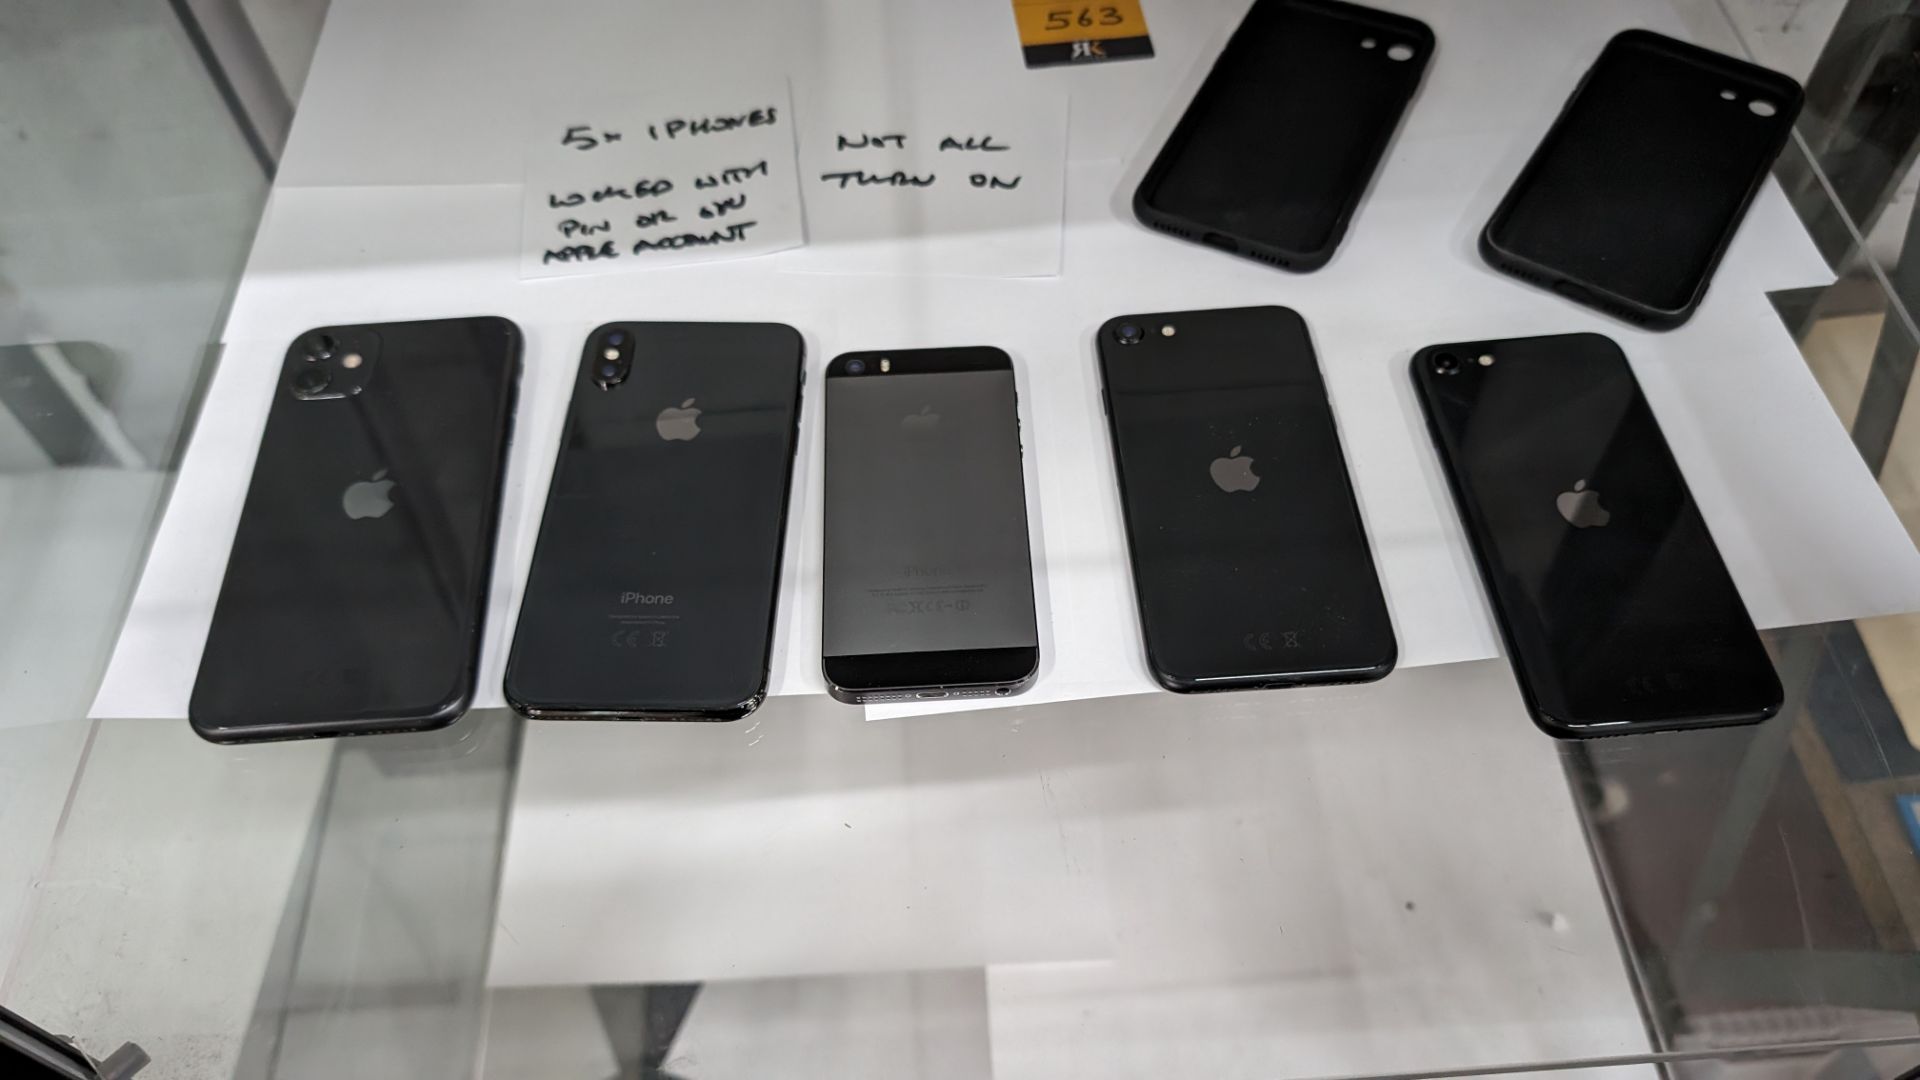 5 off assorted iPhones - these all belonged to a company in Liquidation. However, they are all lock - Bild 9 aus 13